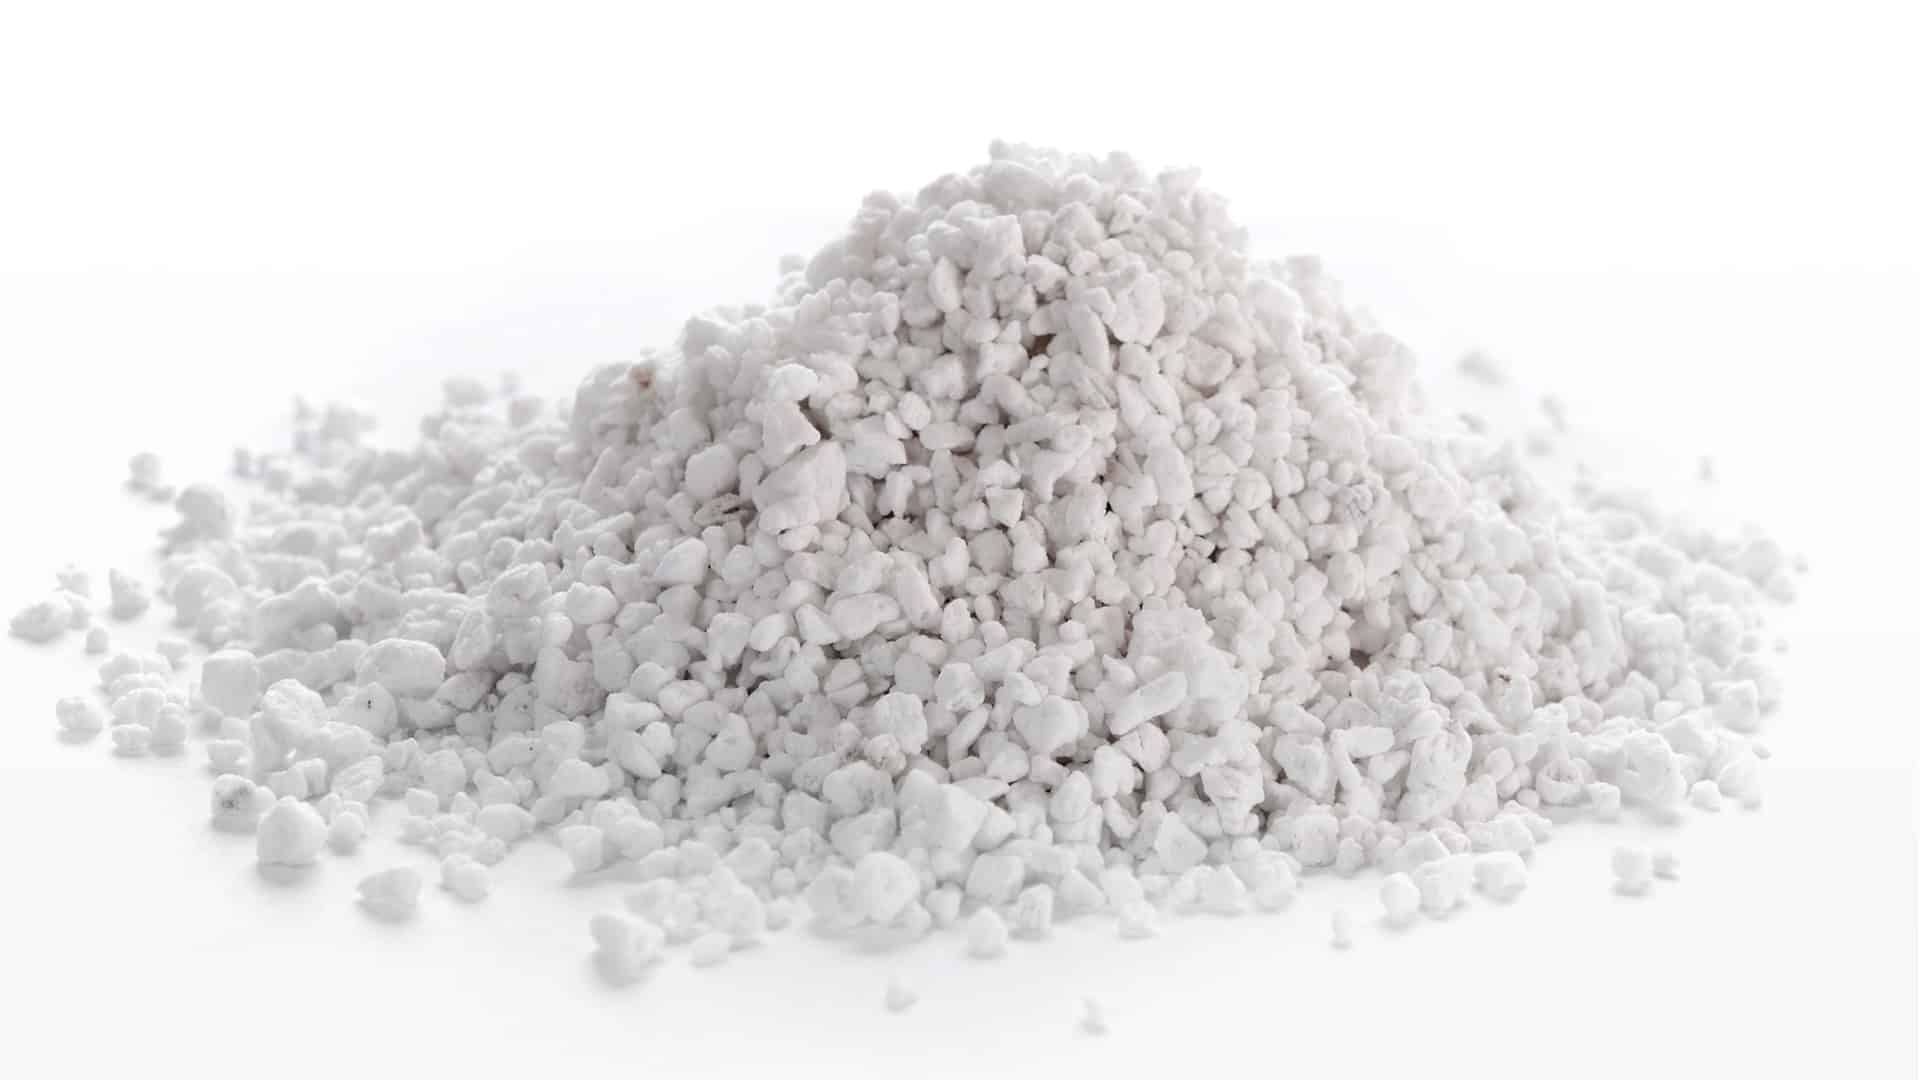 Industrial Applications of Perlite: Filtration and Fireproofing